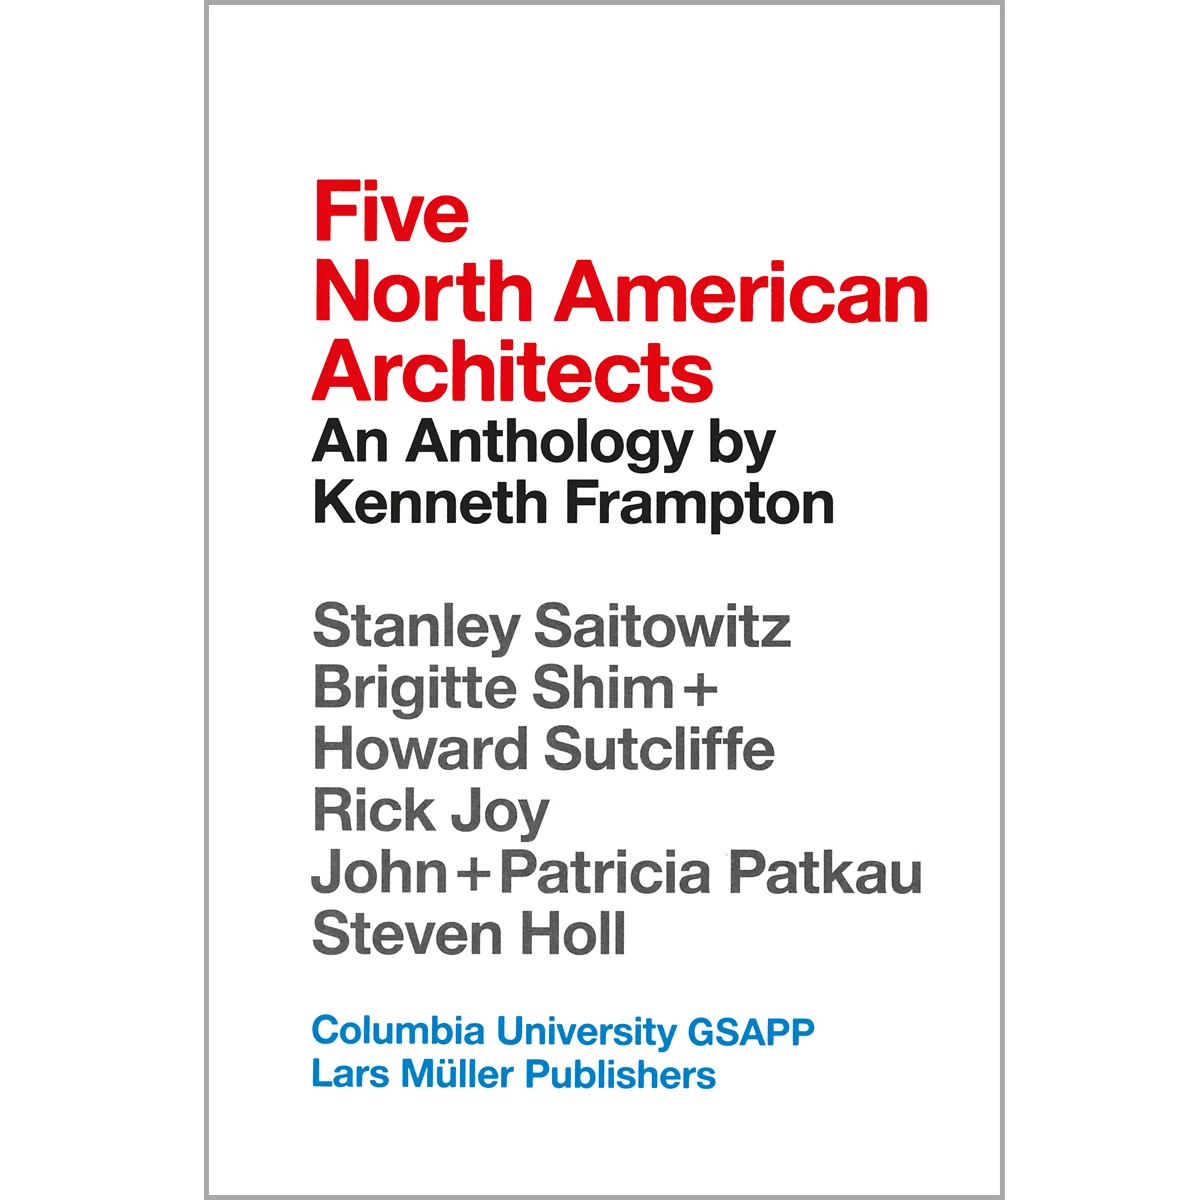 Five North American Architects